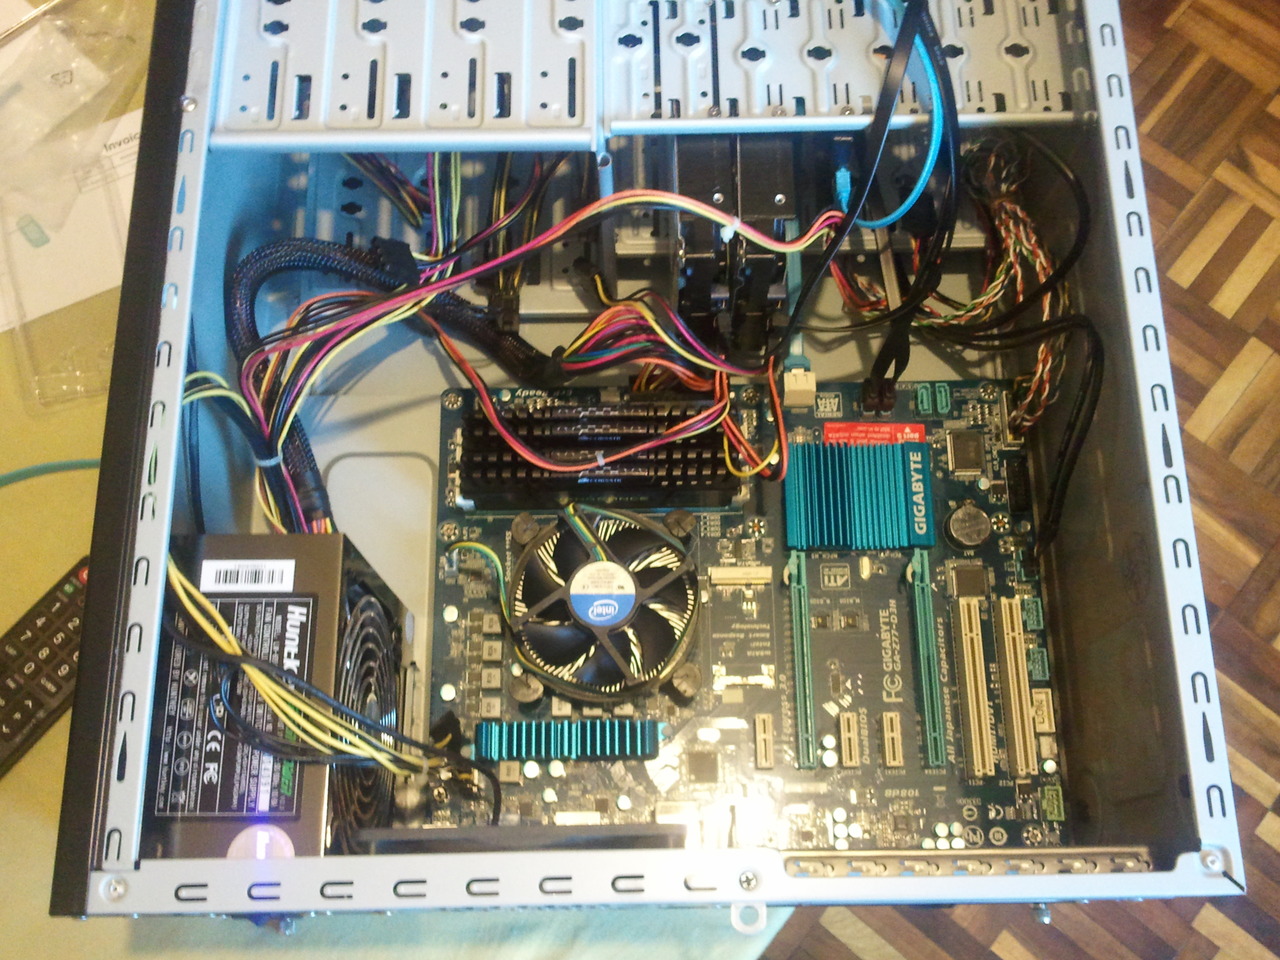 Case with components installed